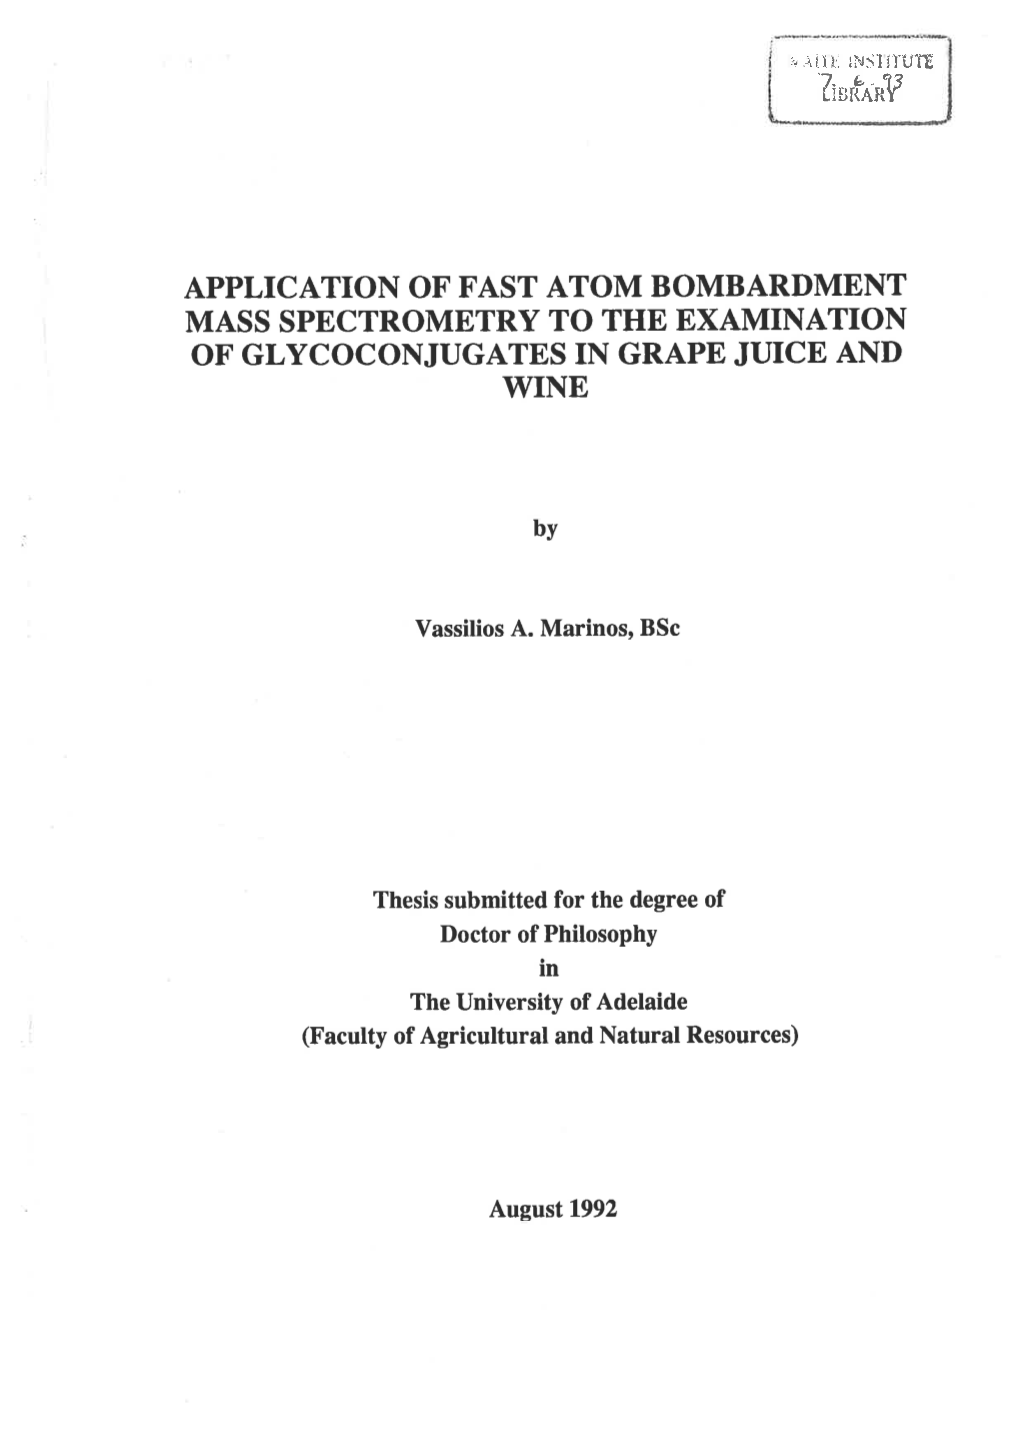 Application of Fast Atom Bombardment Mass Spectrometry to the Examination of Glycoconjugates in Grape Juice and Wine